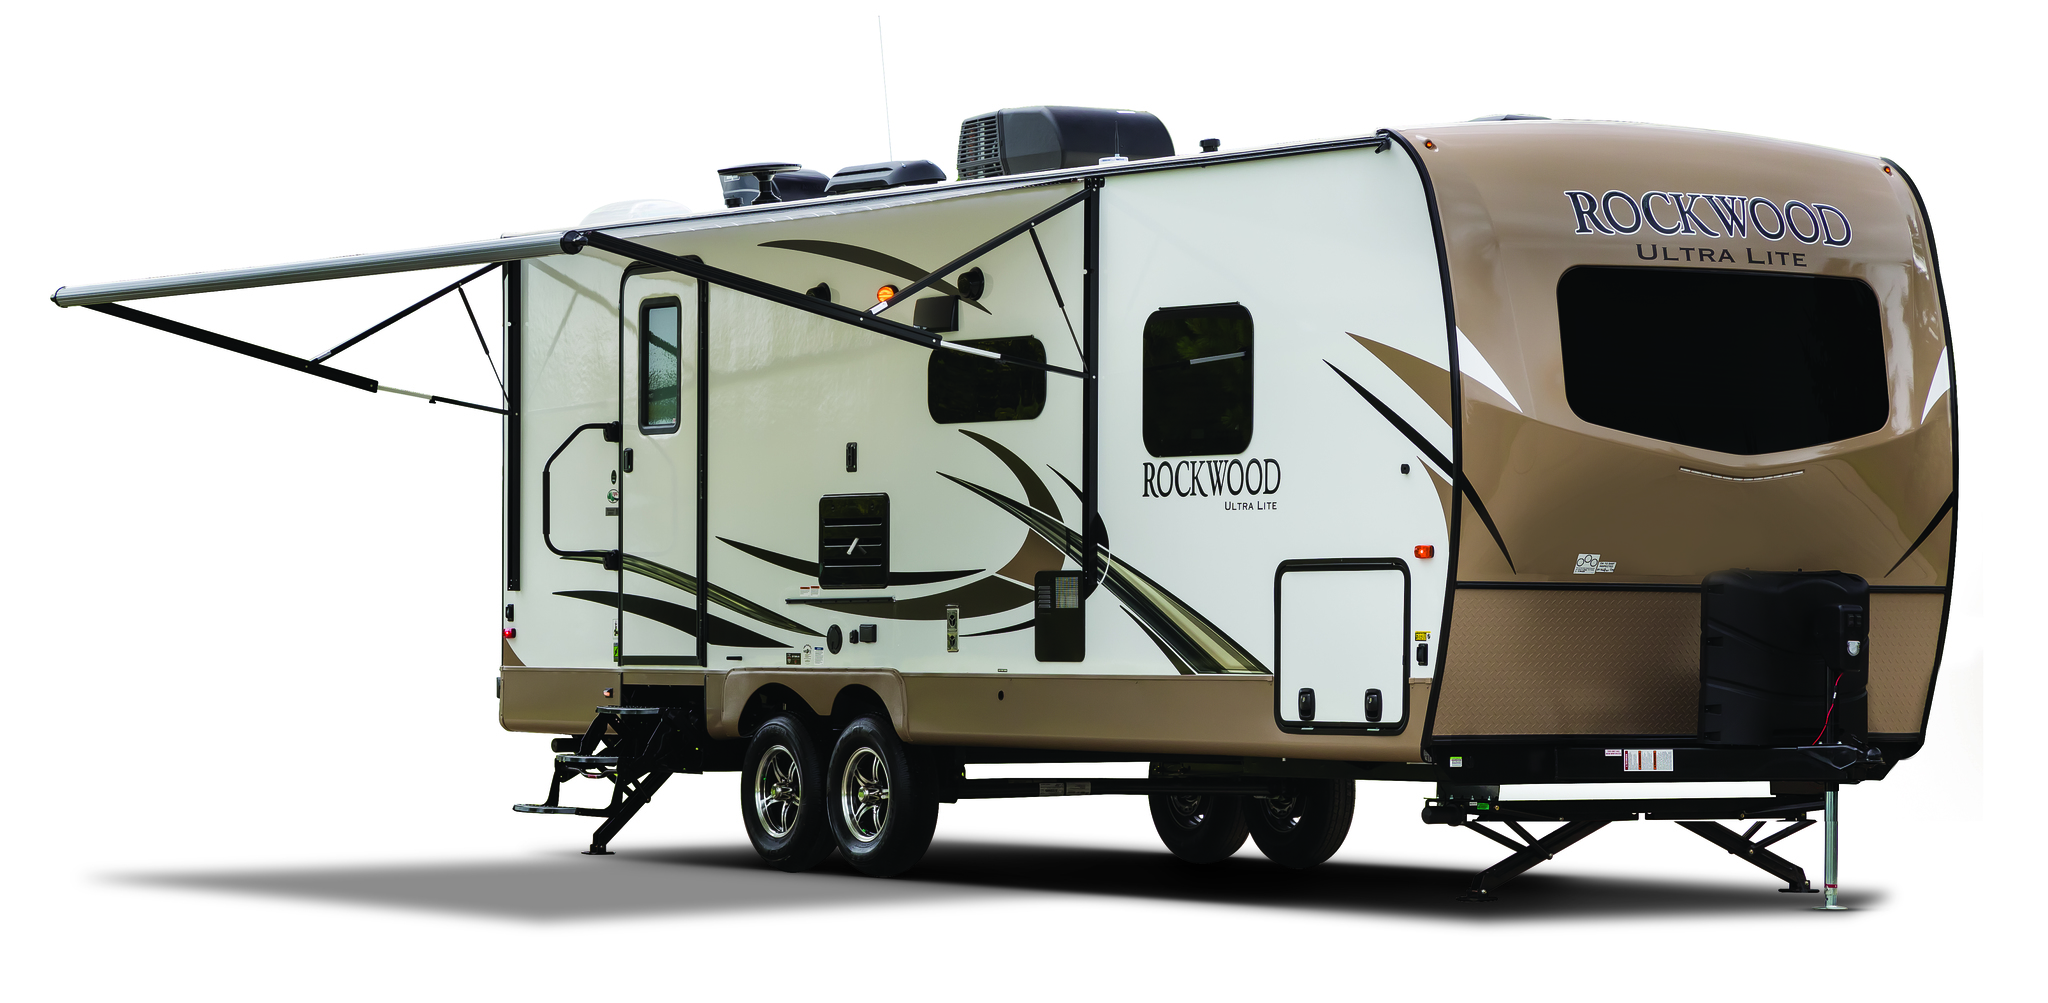 New RVs For Sale near Lloydminster and Ft. McMurray, AB